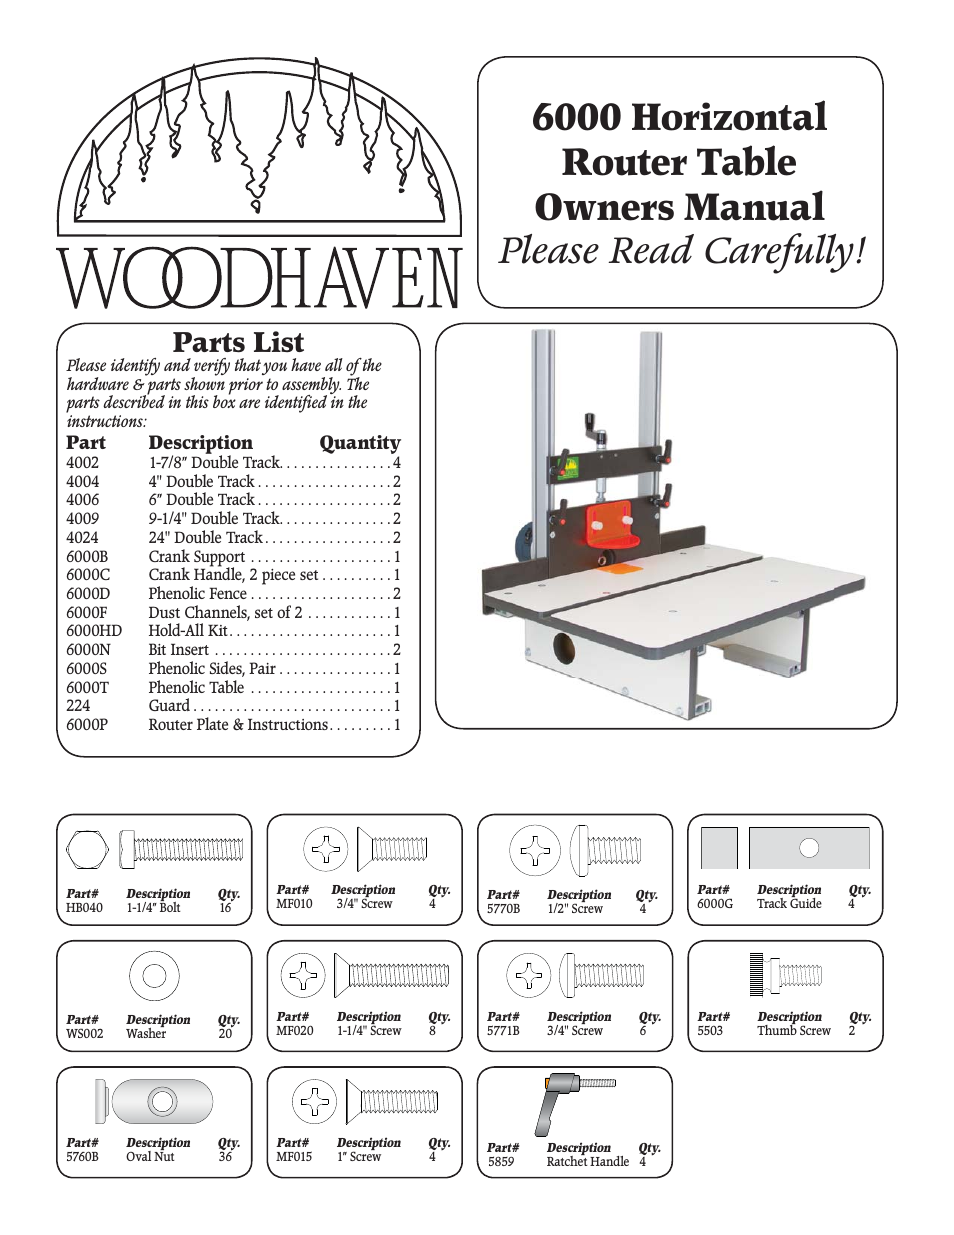 6000: Horizontal Router Table